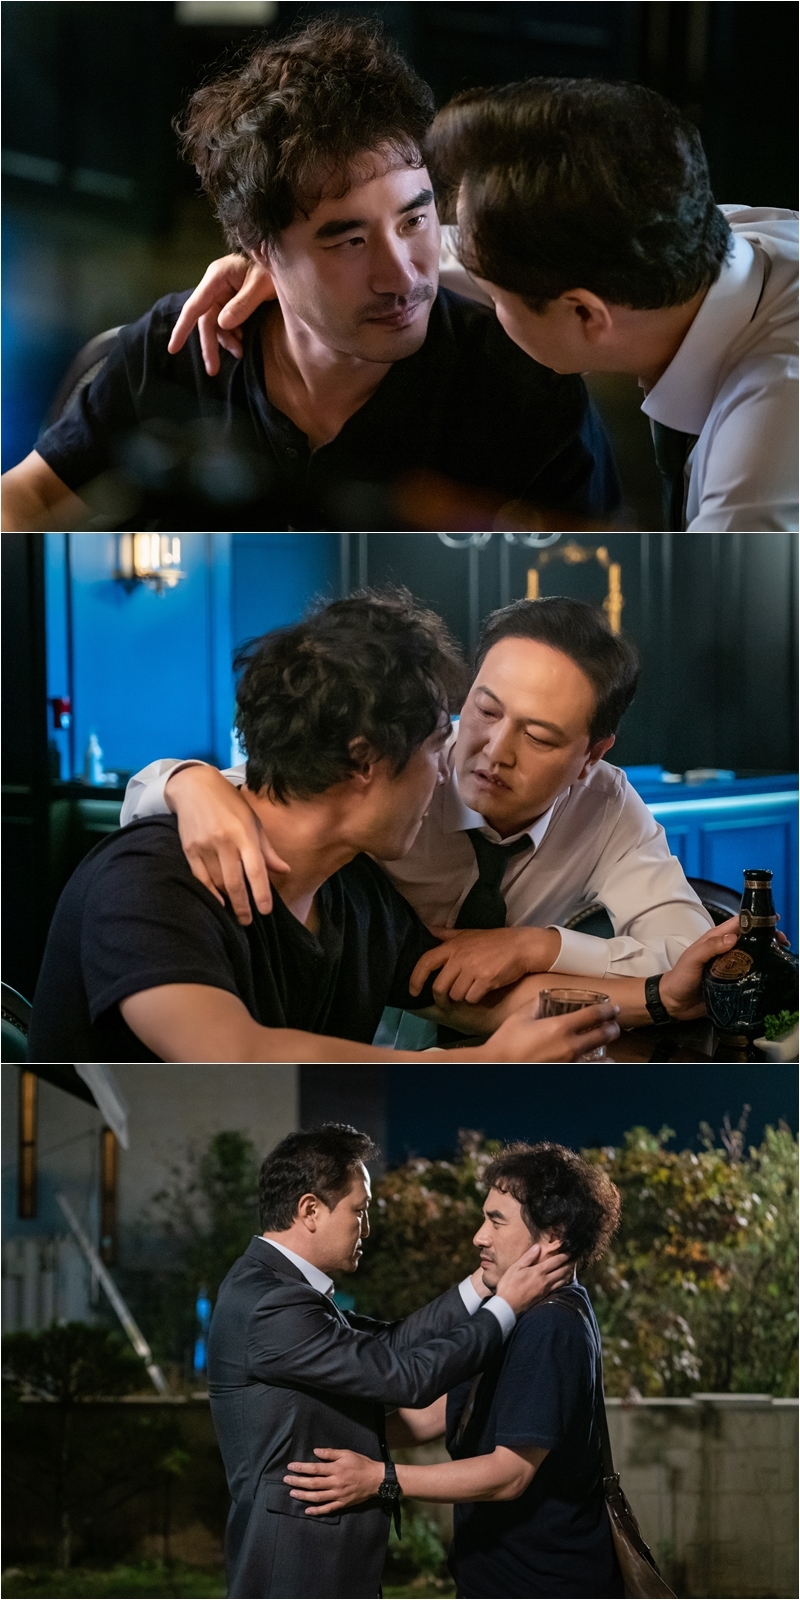 SBS gilt drama Fly and Go to Chun Yong (director Kwak Jung-hwan/playplayplayplayer Park Sang-gyu) caught the meaningful meeting between Park Sam-soo (Bae Seong-woo), who had a hot battle over the Trio New Trial trial in Samjeong City on the 19th, and Jang Yoon-seok (Jung Woong-in), which stimulated curiosity.Flying and changing is adding depth of empathy as the time goes by.Park Tae-yong (Kwon Sang-woo) and Park Sam-soo struggled to overturn the New Trial trial of Trio in Samjung City, which was falsely accused.Park Sam-soo moved the hearts of the real criminals by publishing Kang Sang-hyuns sad story as an article, and Park Tae-yong succeeded in finding Lee Chulgyu (Kwon Dong-ho).And the opportunity to reverse the two men who were helpless on the carefully designed plate came to the scene, when the trial began to change as the true criminal Lee Chulgyu confessed to the crime.Expectations are high that Park Tae-yong and Park Sam-soo will be able to fight back with excitement.In the meantime, the meeting between Park Sam-soo and Jang Yoon-seok, who set up a tense confrontation in the public photos, raises questions.Park Sam-soo, who went to reveal the truth of the Trio case in Samjung City, and Jang Yoon-seok, who blocked them to cover up his mistakes, are interesting to see the secret meeting between the two people who had a confrontation at the trial.Jang Yoon-seok, who is giving up his enthusiasm with the momentum to be repentant, but Park Sam-soo is looking at him firmly without shaking.Park Sam-soo, who makes a disapproving expression on Jang Yoon-seoks affectionate skin in the subsequent photos, also raises the question of why Jang Yoon-seok approached Park Sam-soo.In the sixth episode, the results of the Trio New Trial trial in Samjung are sentenced.Whether the confession of Jinbum Lee Chulgyu can overturn the plate, Park Tae-yong and Park Sam-soo will add anticipation to the defined implementation counter electrode.Park Sam-soo and Jang Yoon-seok have an unexpected meeting, said the production team of Flying and Going to the Stream. Watch what variables will act in the New Trial trial, and see if Park Tae-yong and Park Sam-soo will have a chance to reverse and achieve miracles.On the other hand, the 6th Flying for the Go will be broadcast at 10 pm on the day.